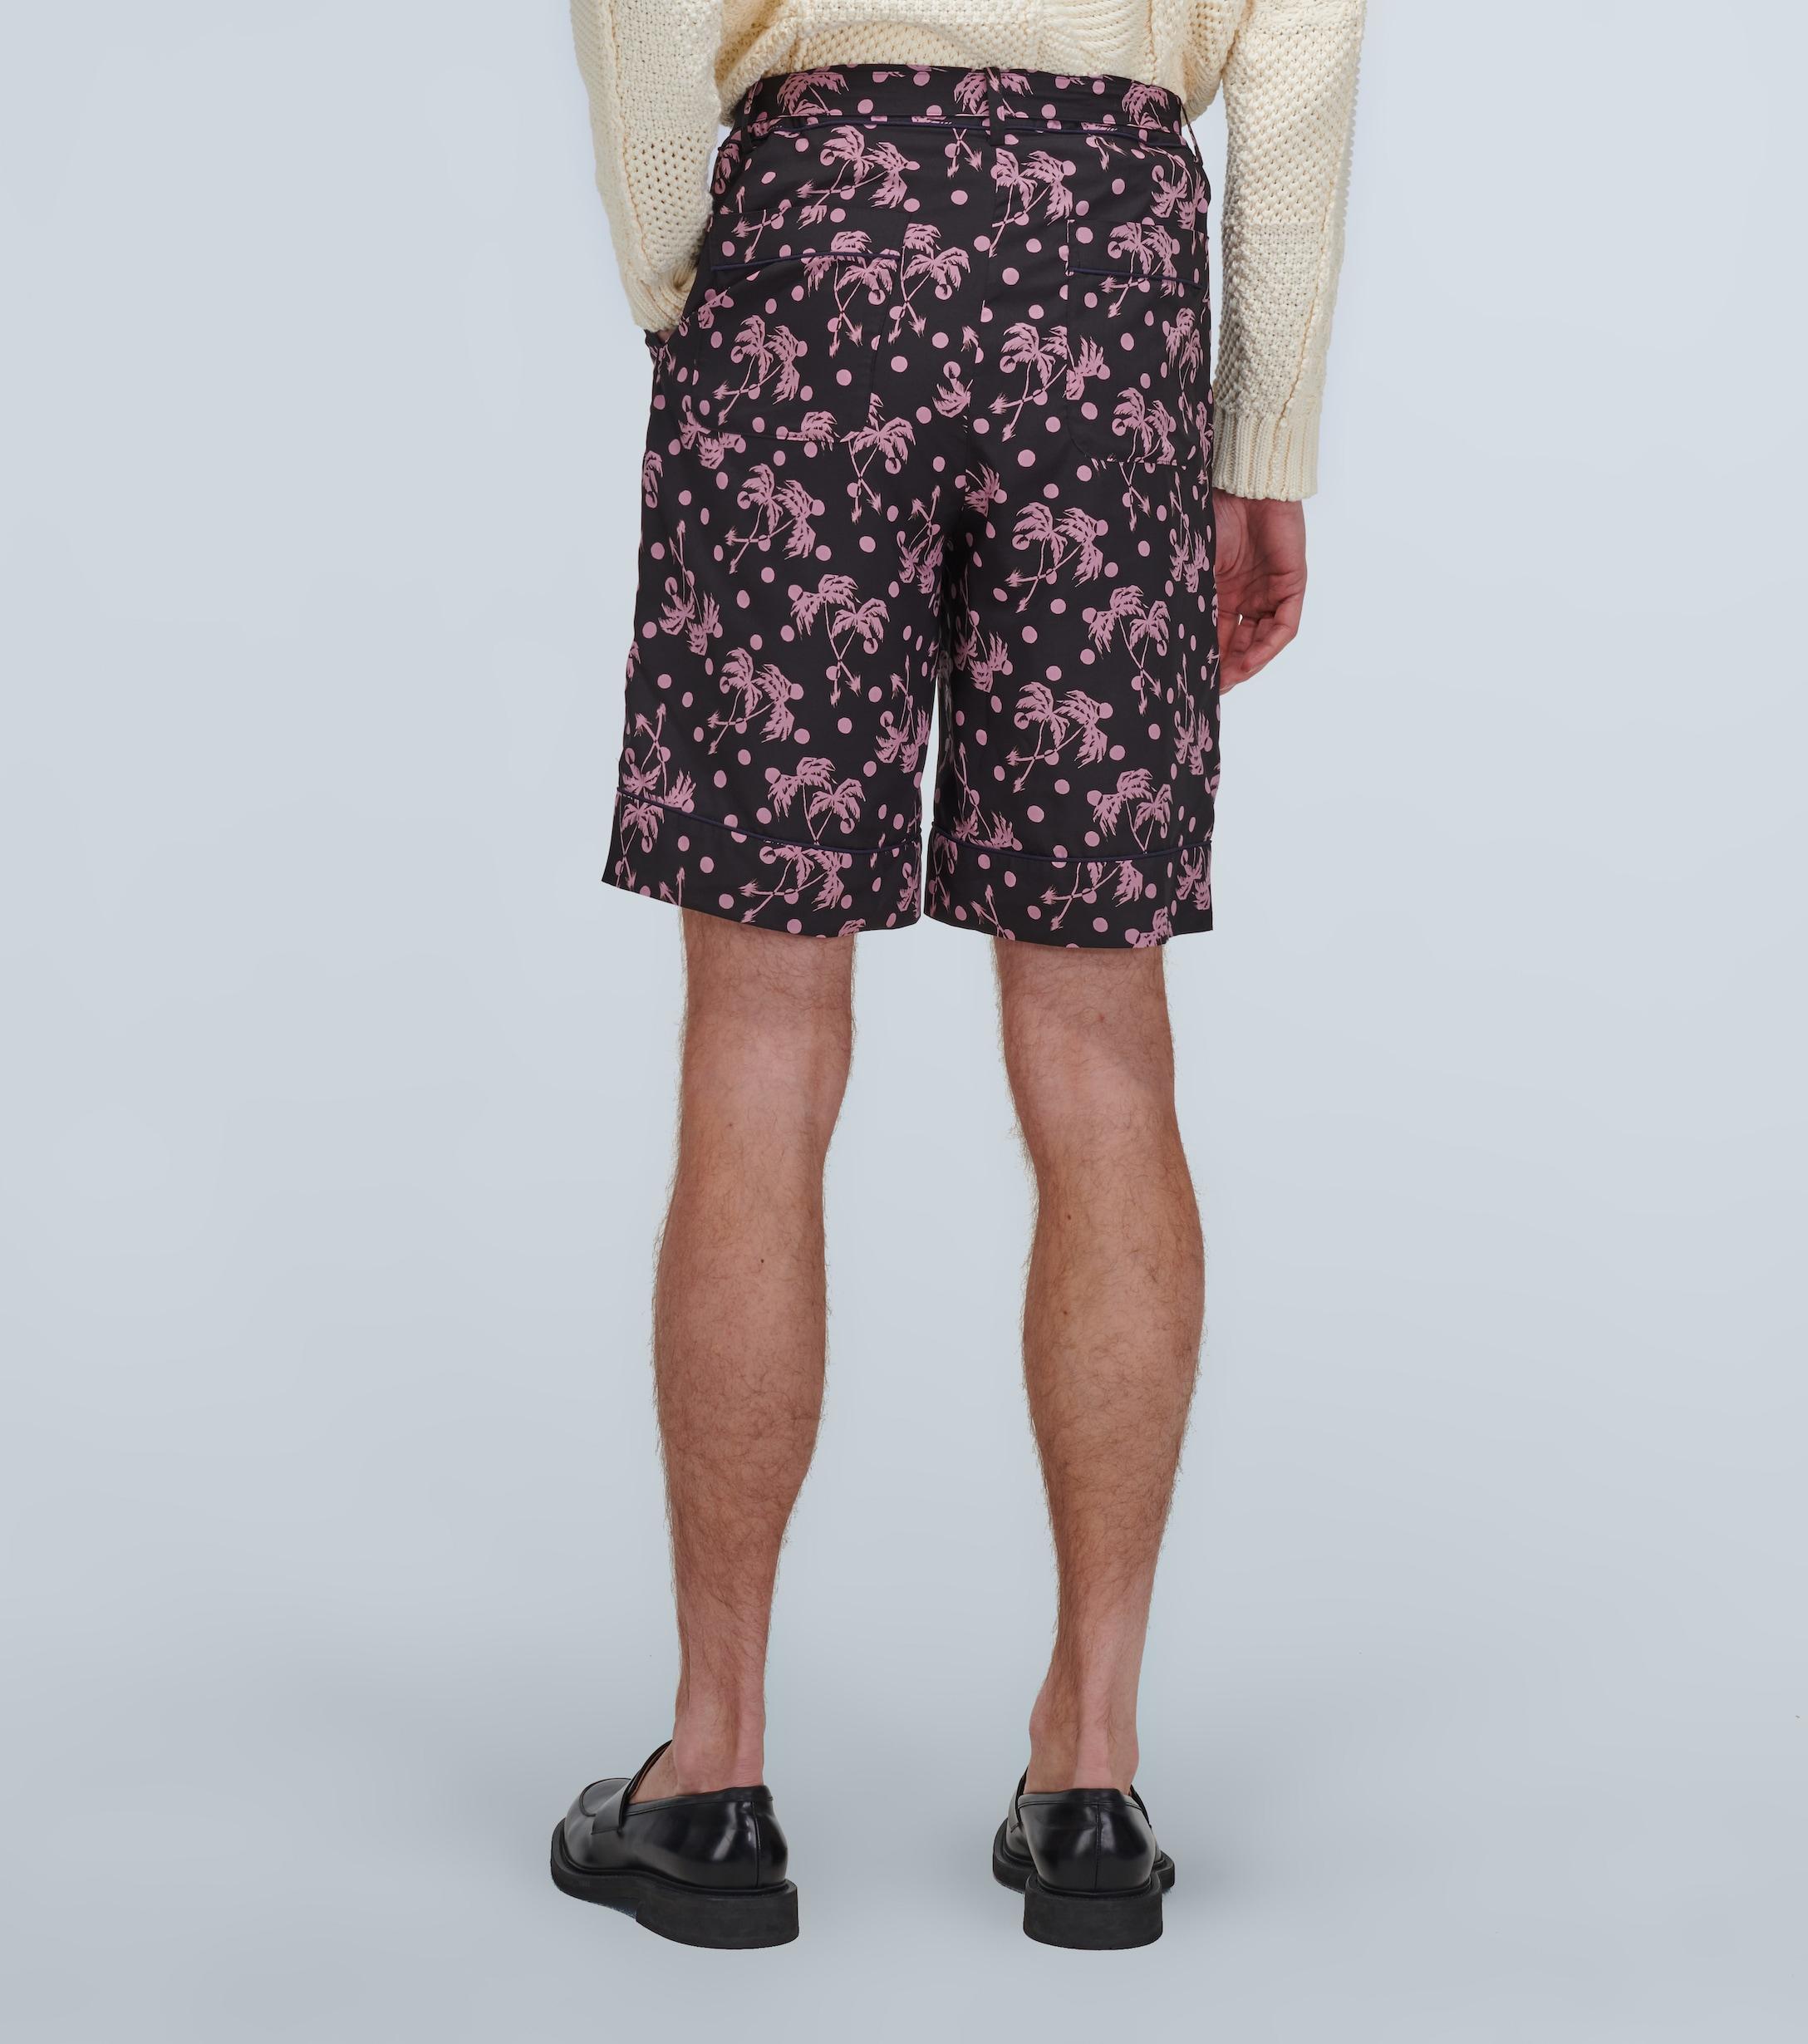 Sacai Synthetic Sun Surf Palm Tree Shorts in Black for Men - Lyst